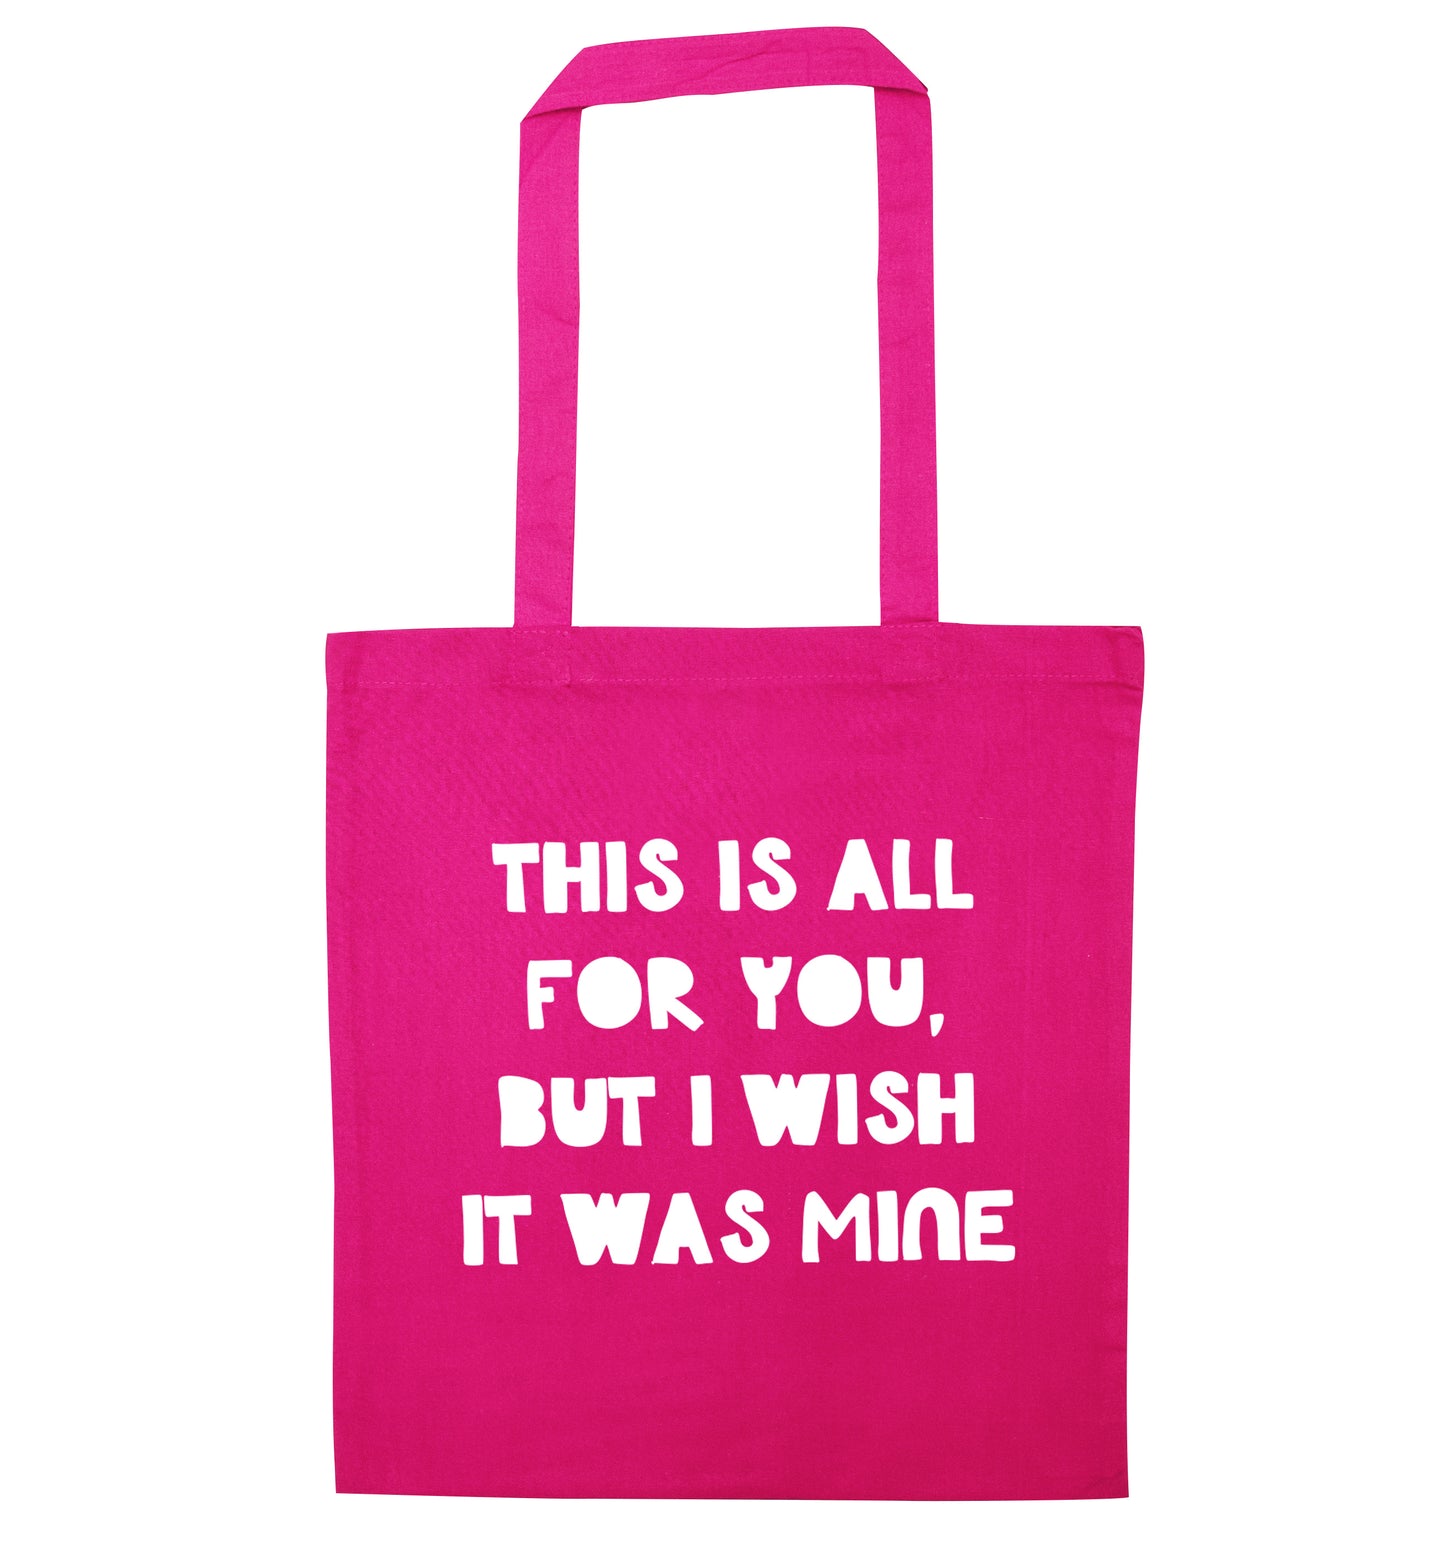 This is all for you but I wish it was mine pink tote bag